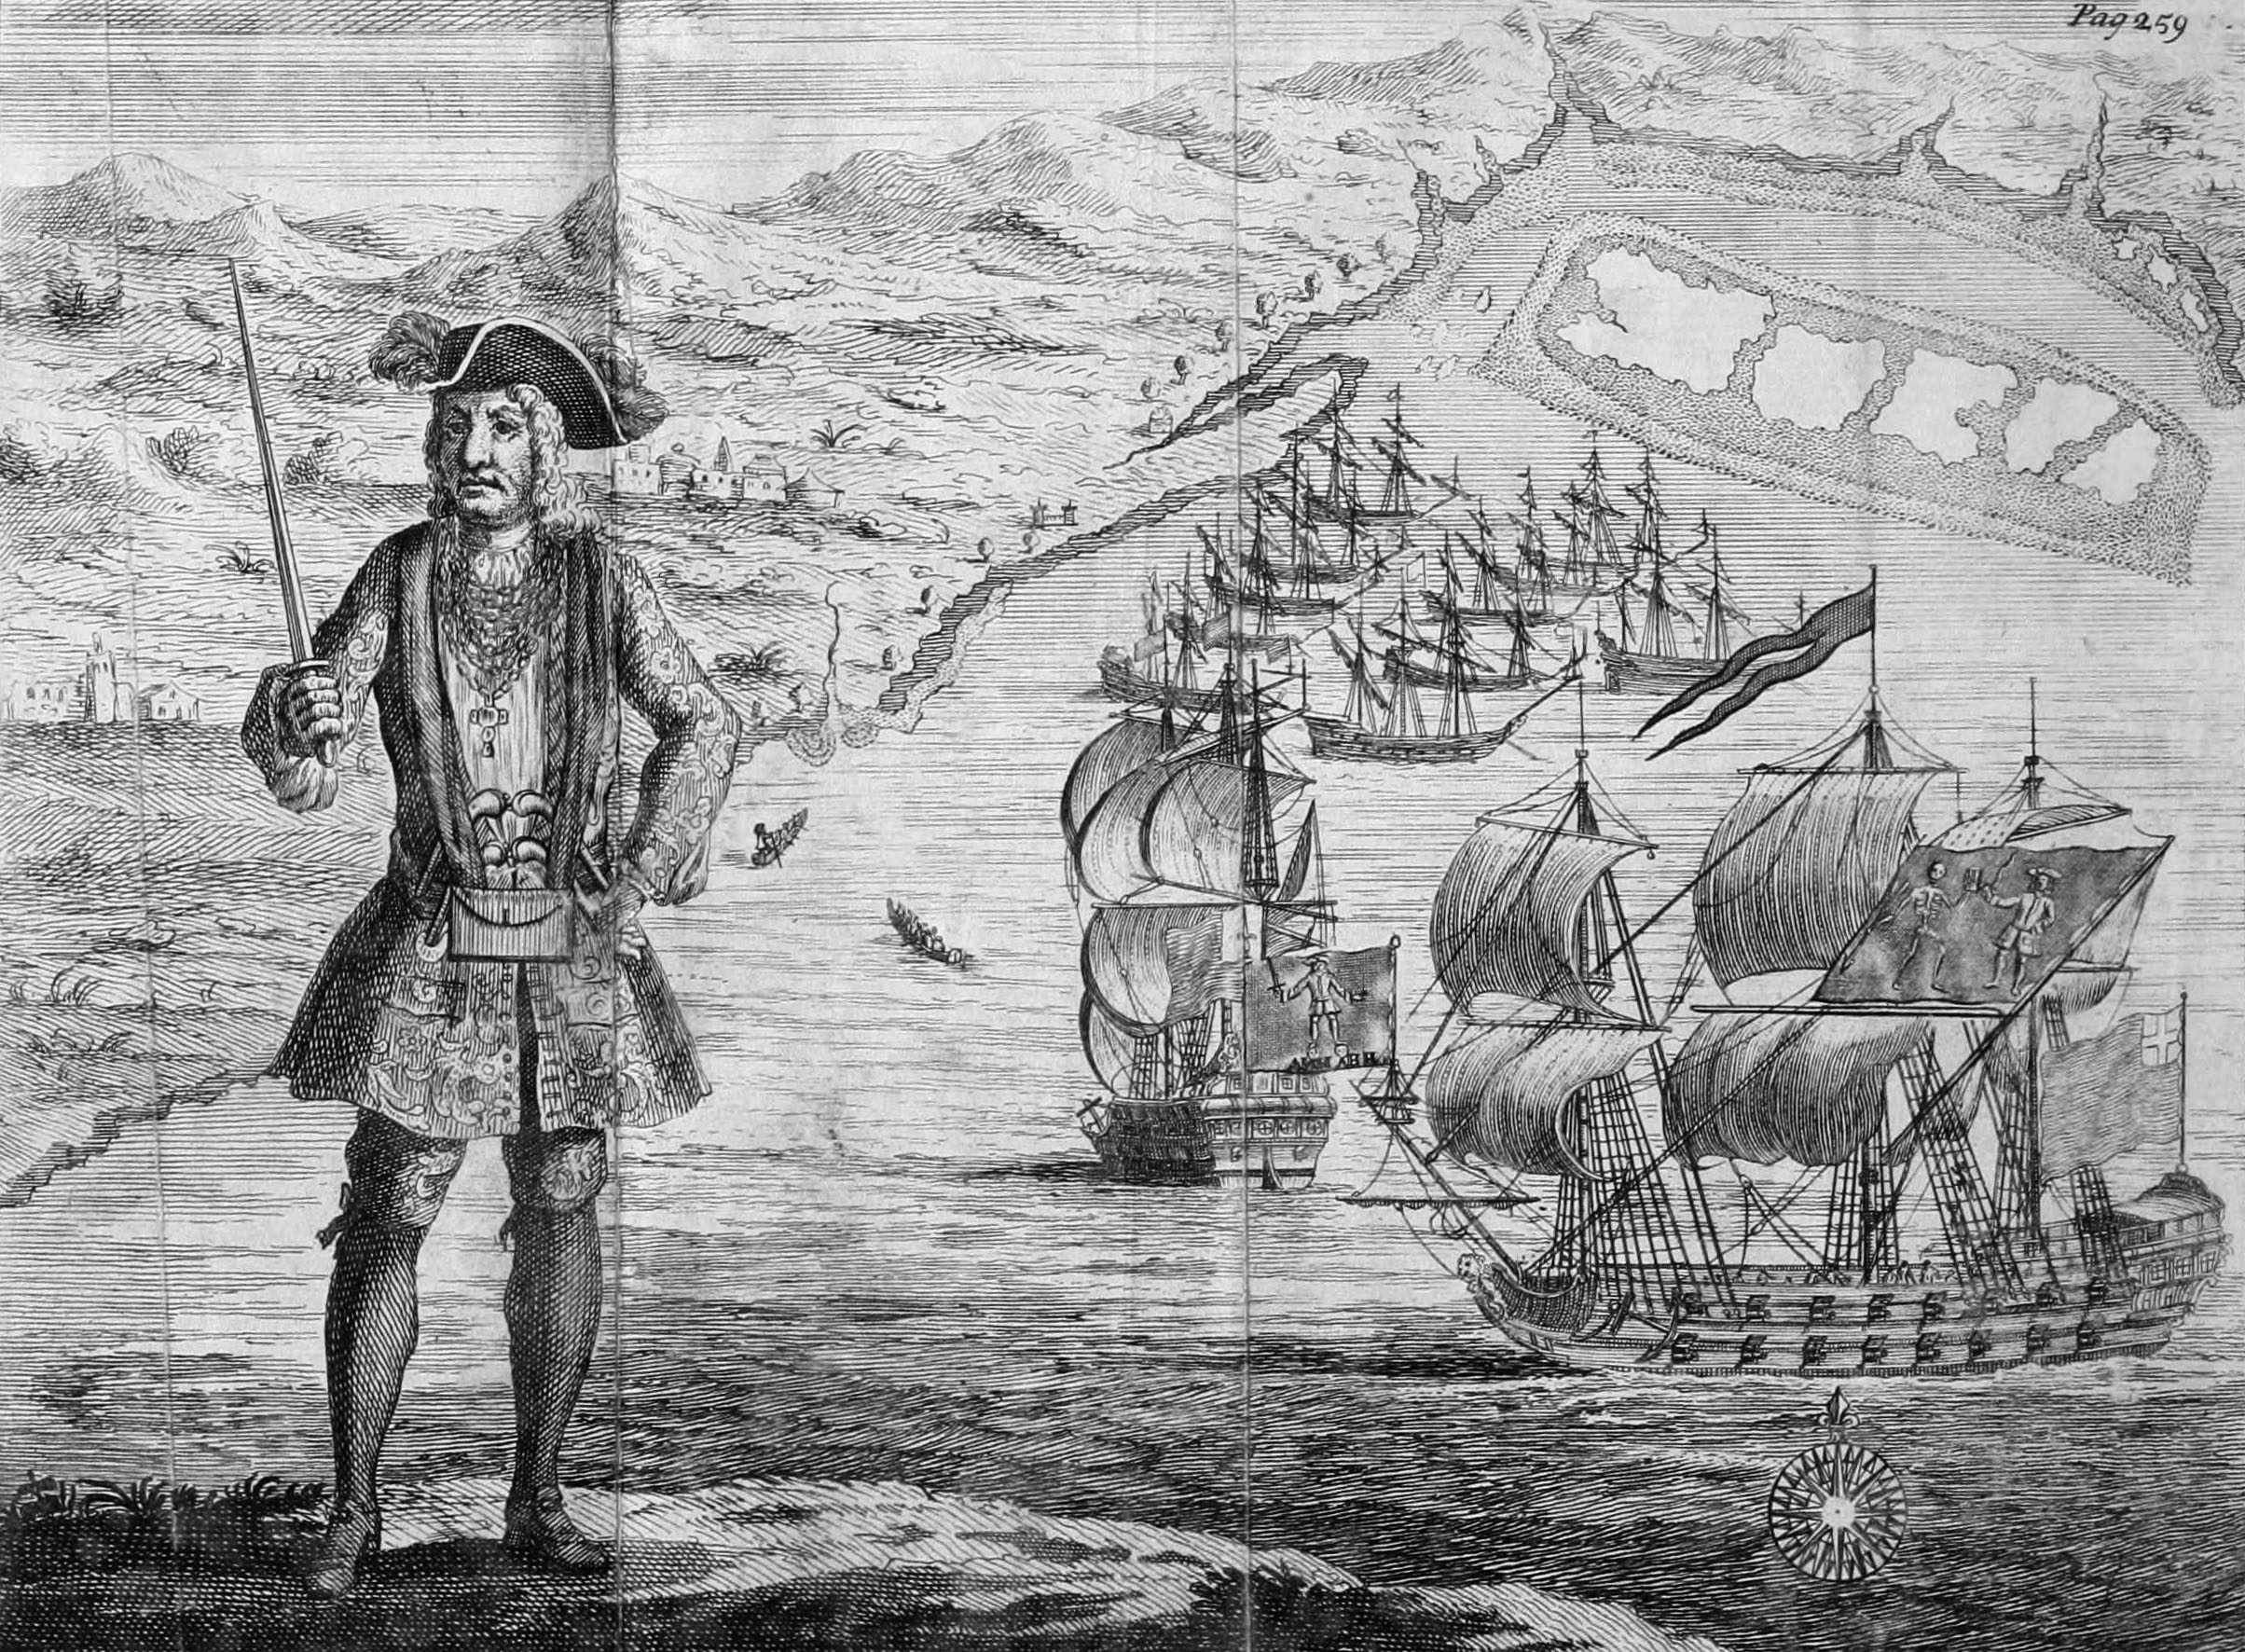 General History of the Pyrates: Captain Bartholomew with Two Ships